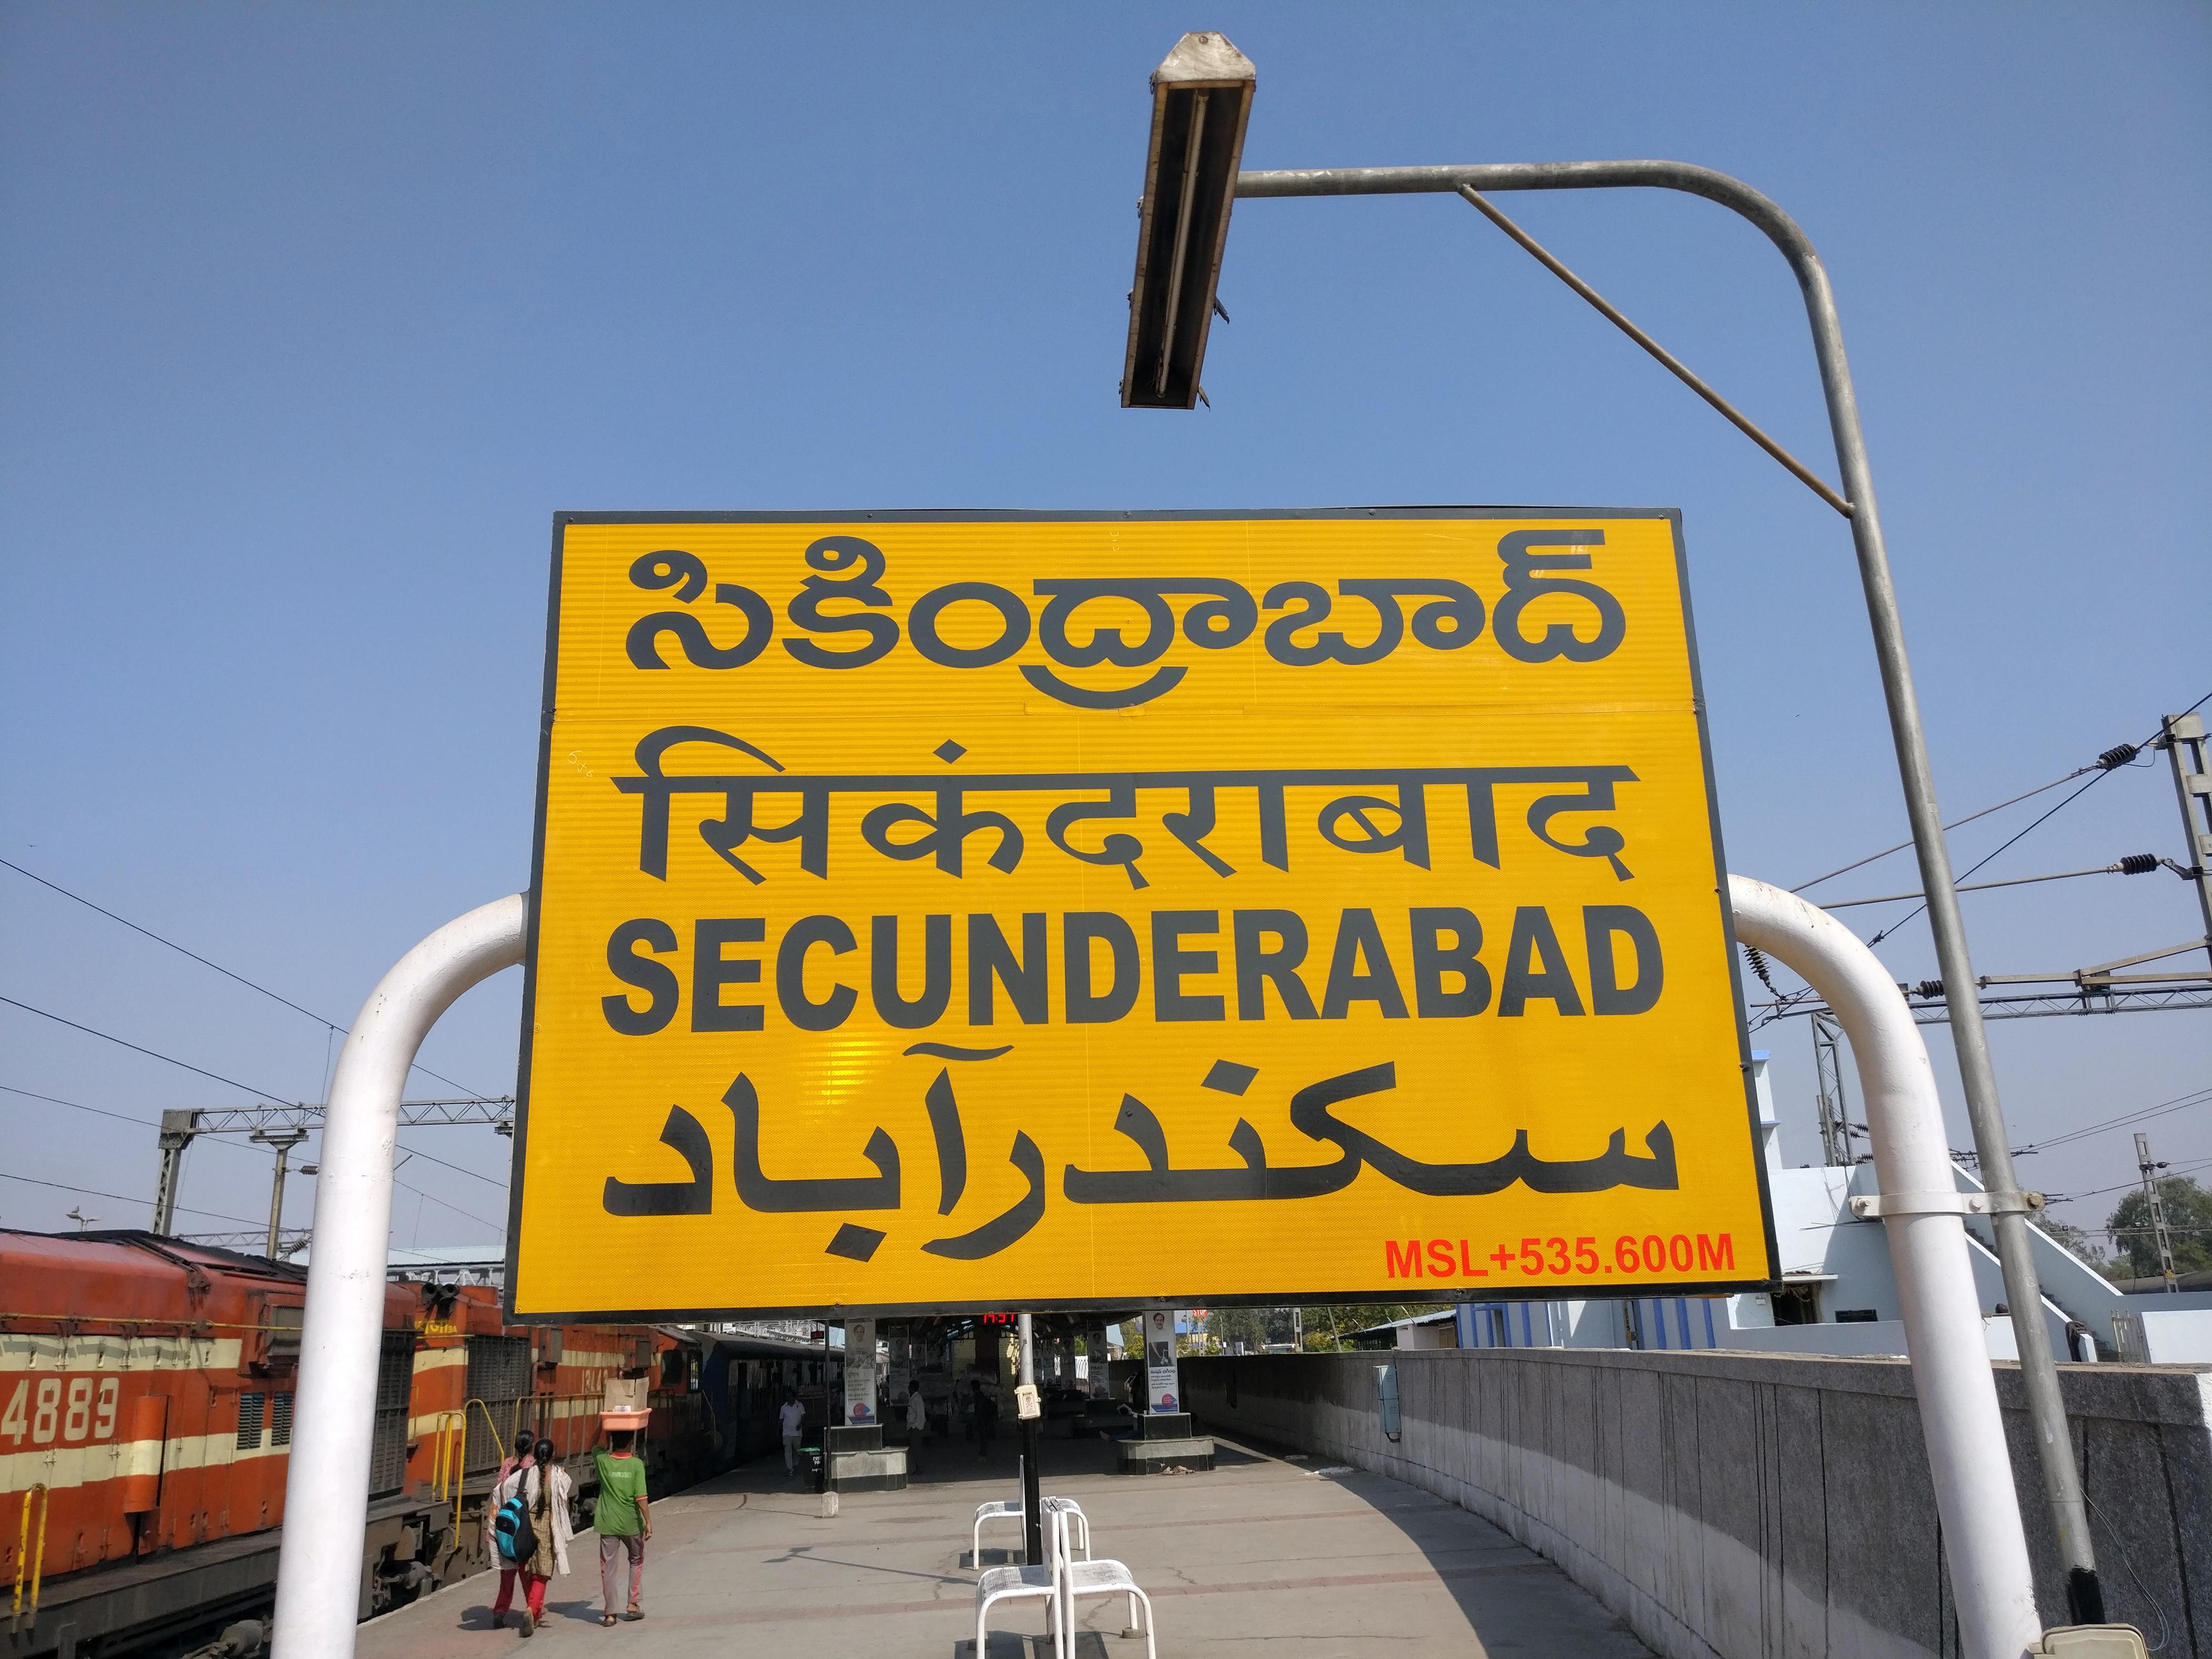 tourist places near secunderabad railway station